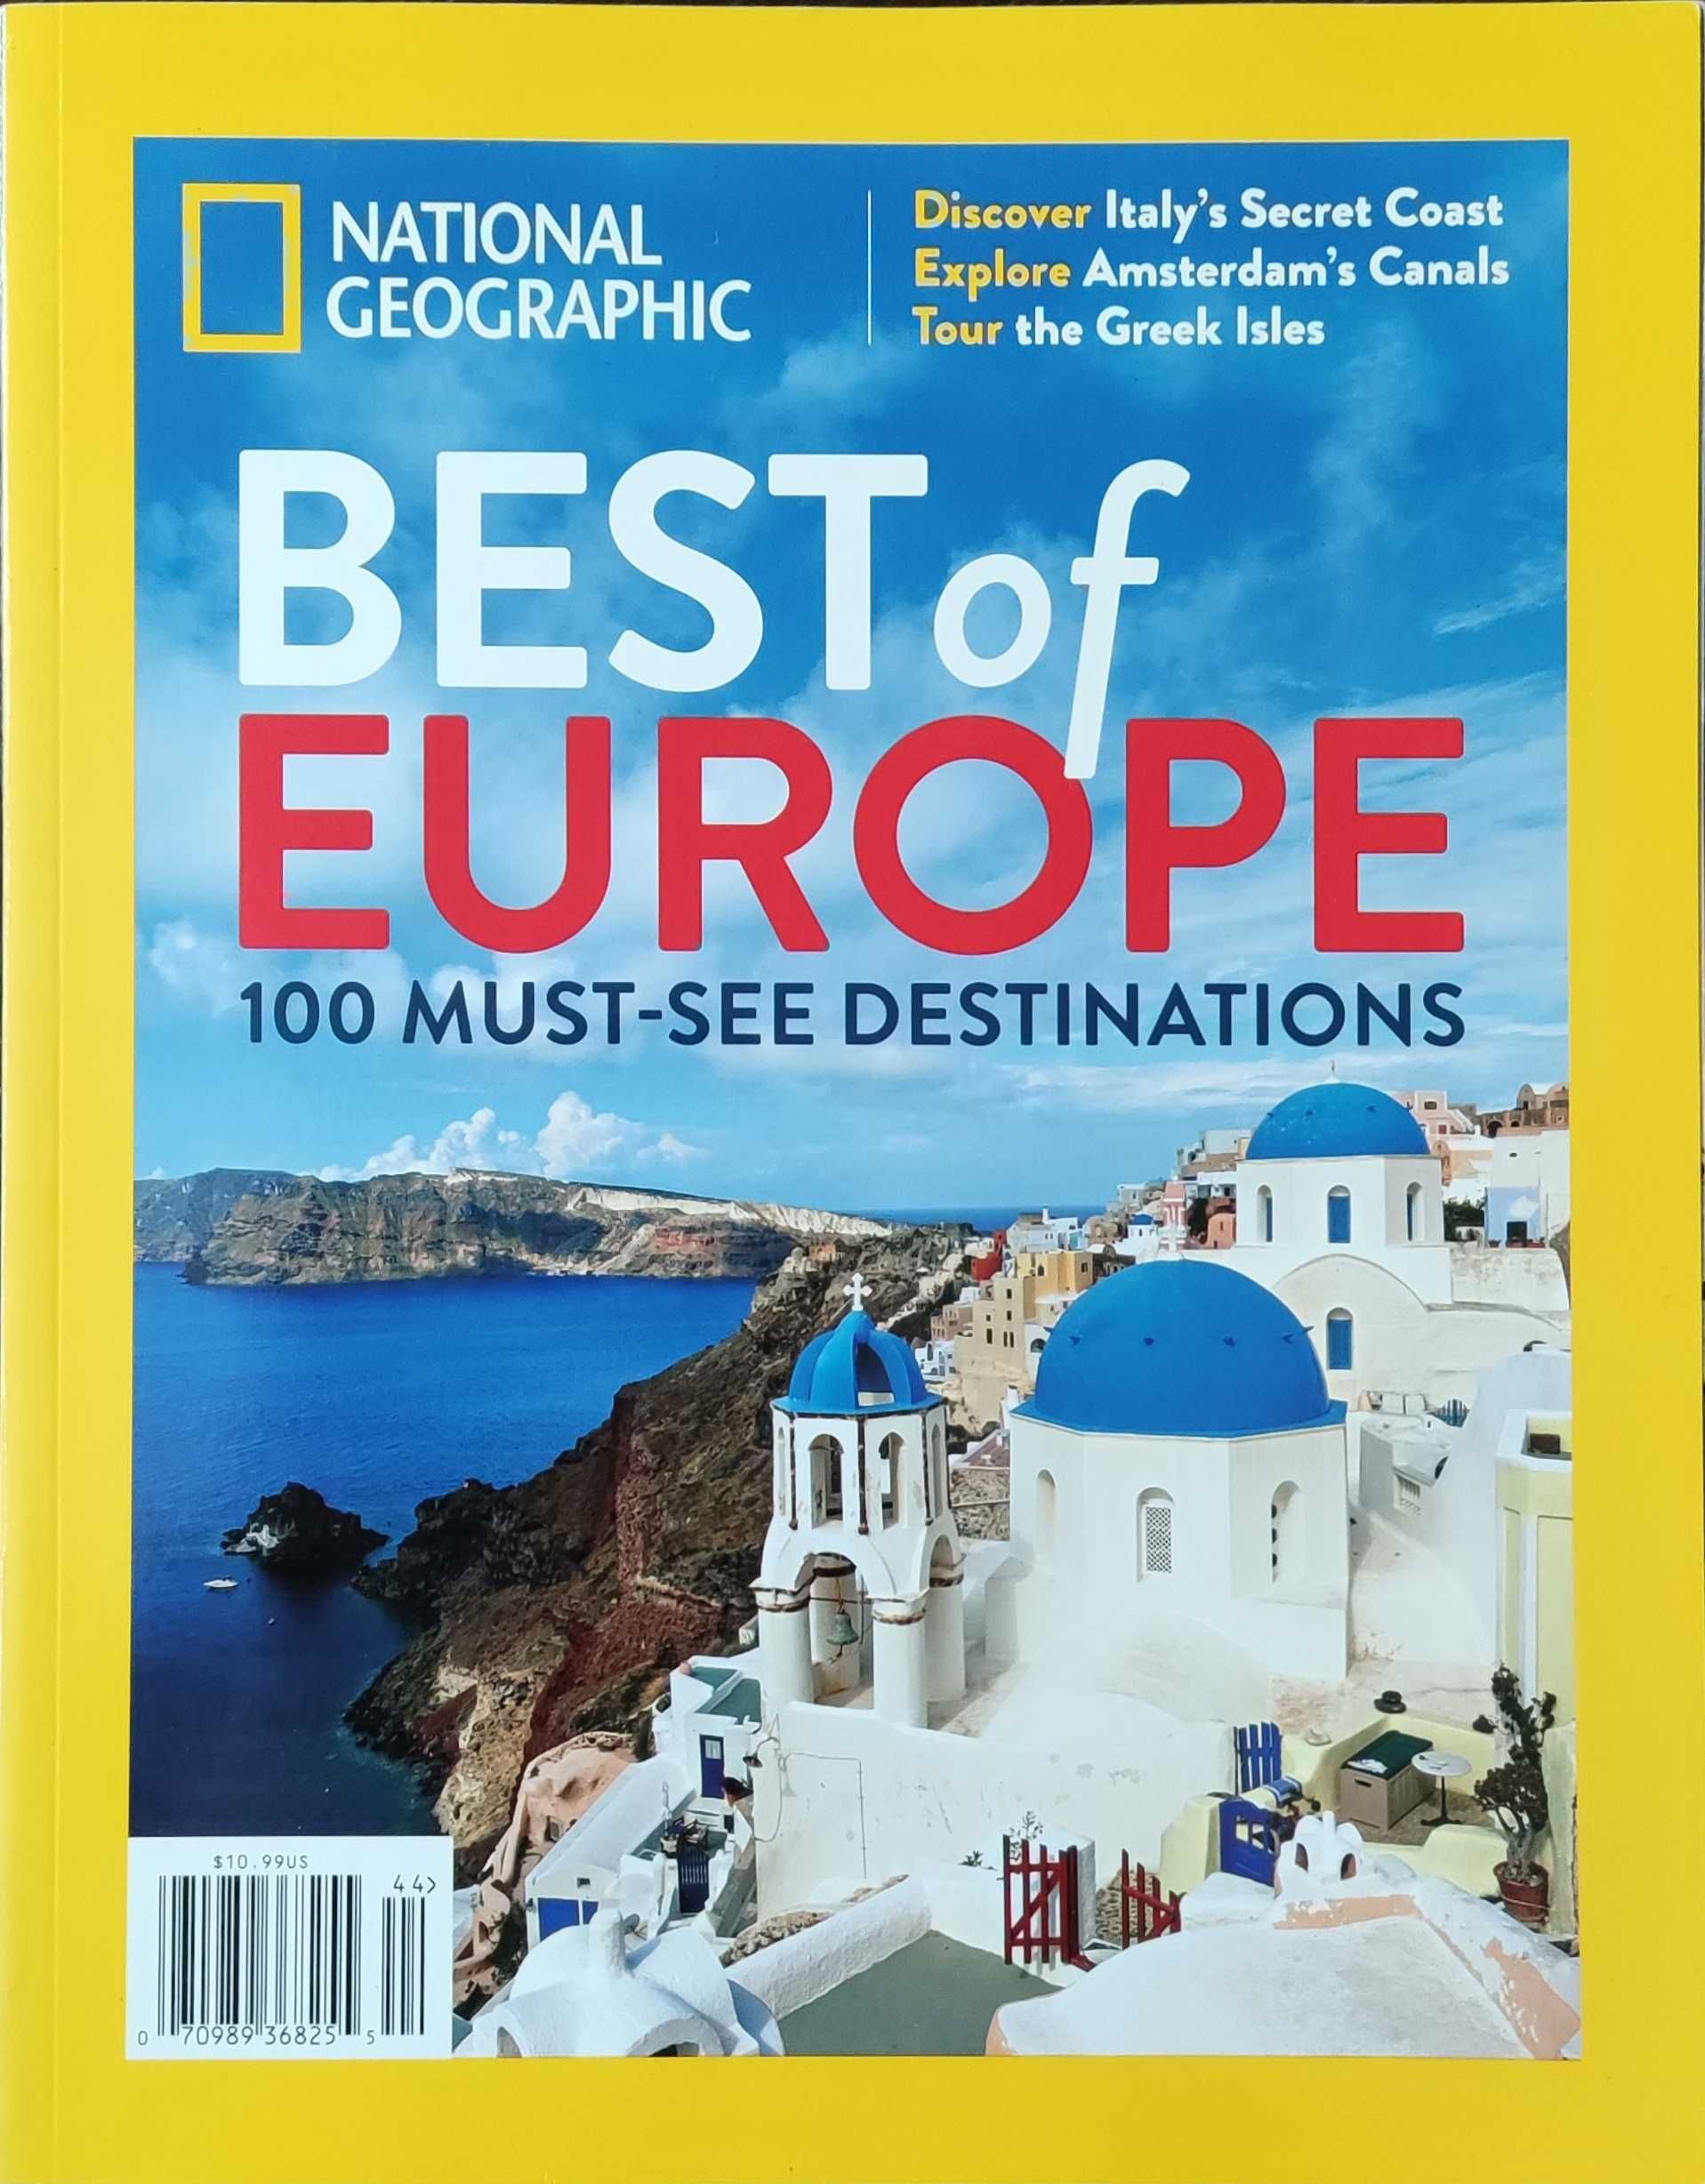 Best of Europe. 100 must-see destinations. National geographic.